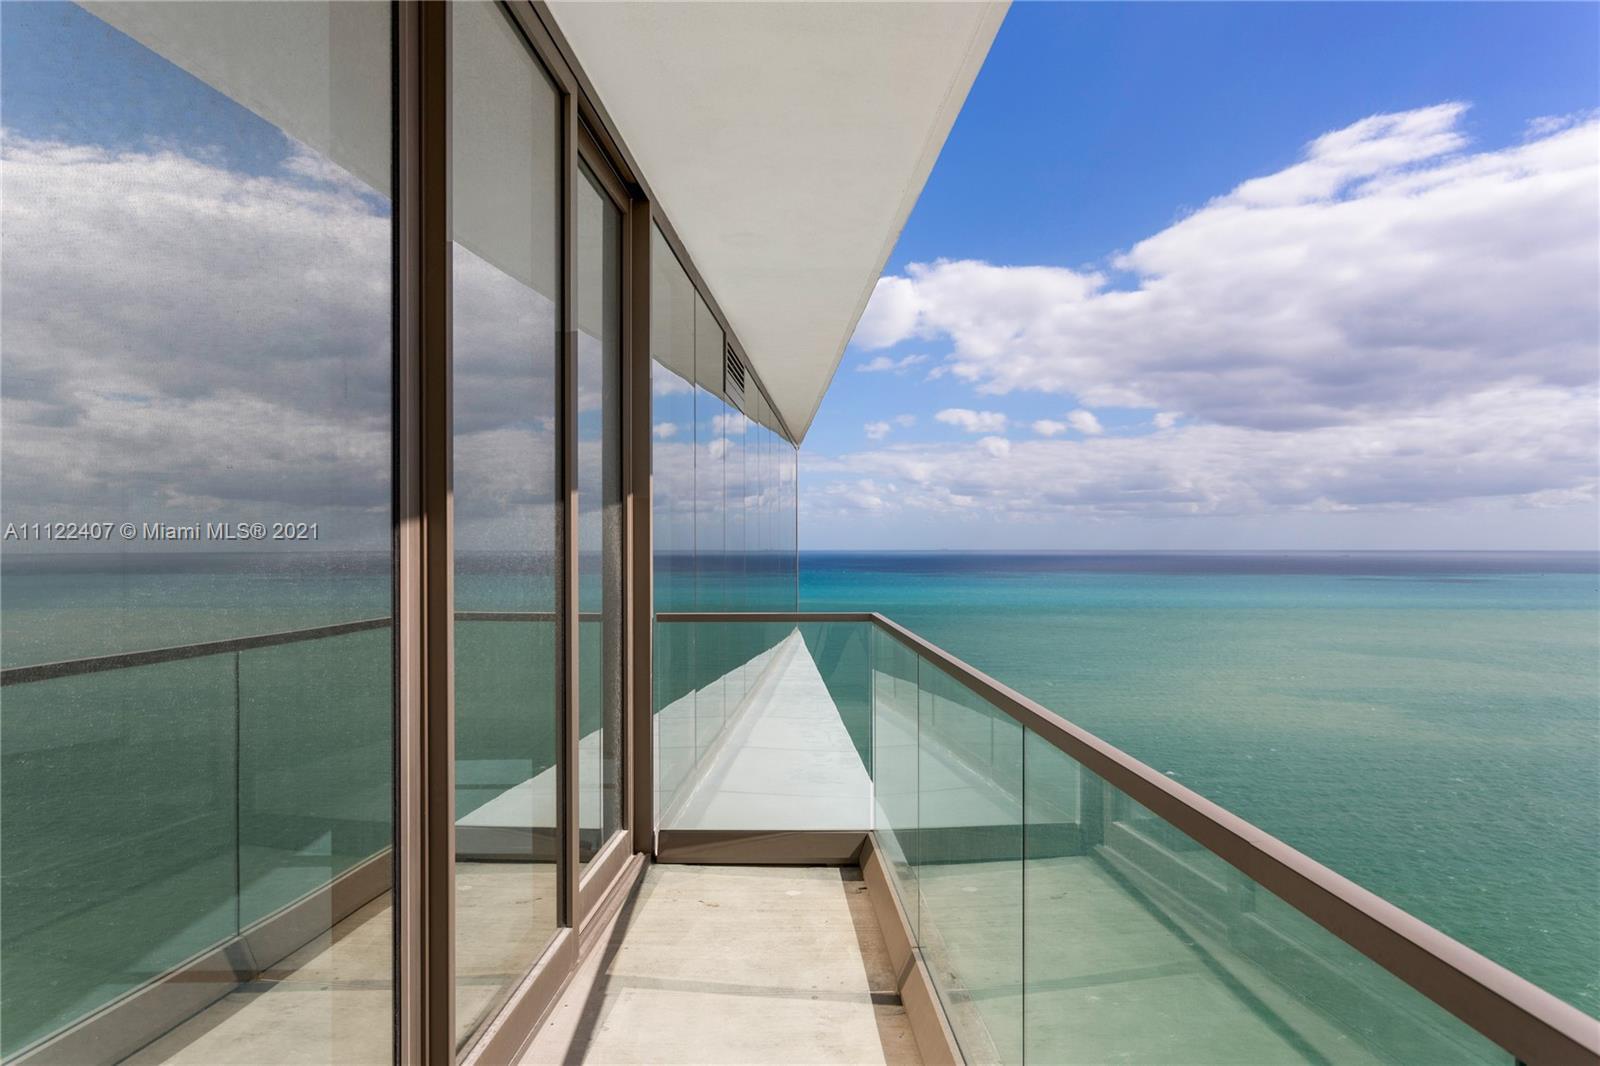 WITH VIEWS OVER SPARKLING OCEAN AND BLUE SKIES, THIS STUNNING OCEANFRONT RESIDENCE IS A WORLD OF SOP